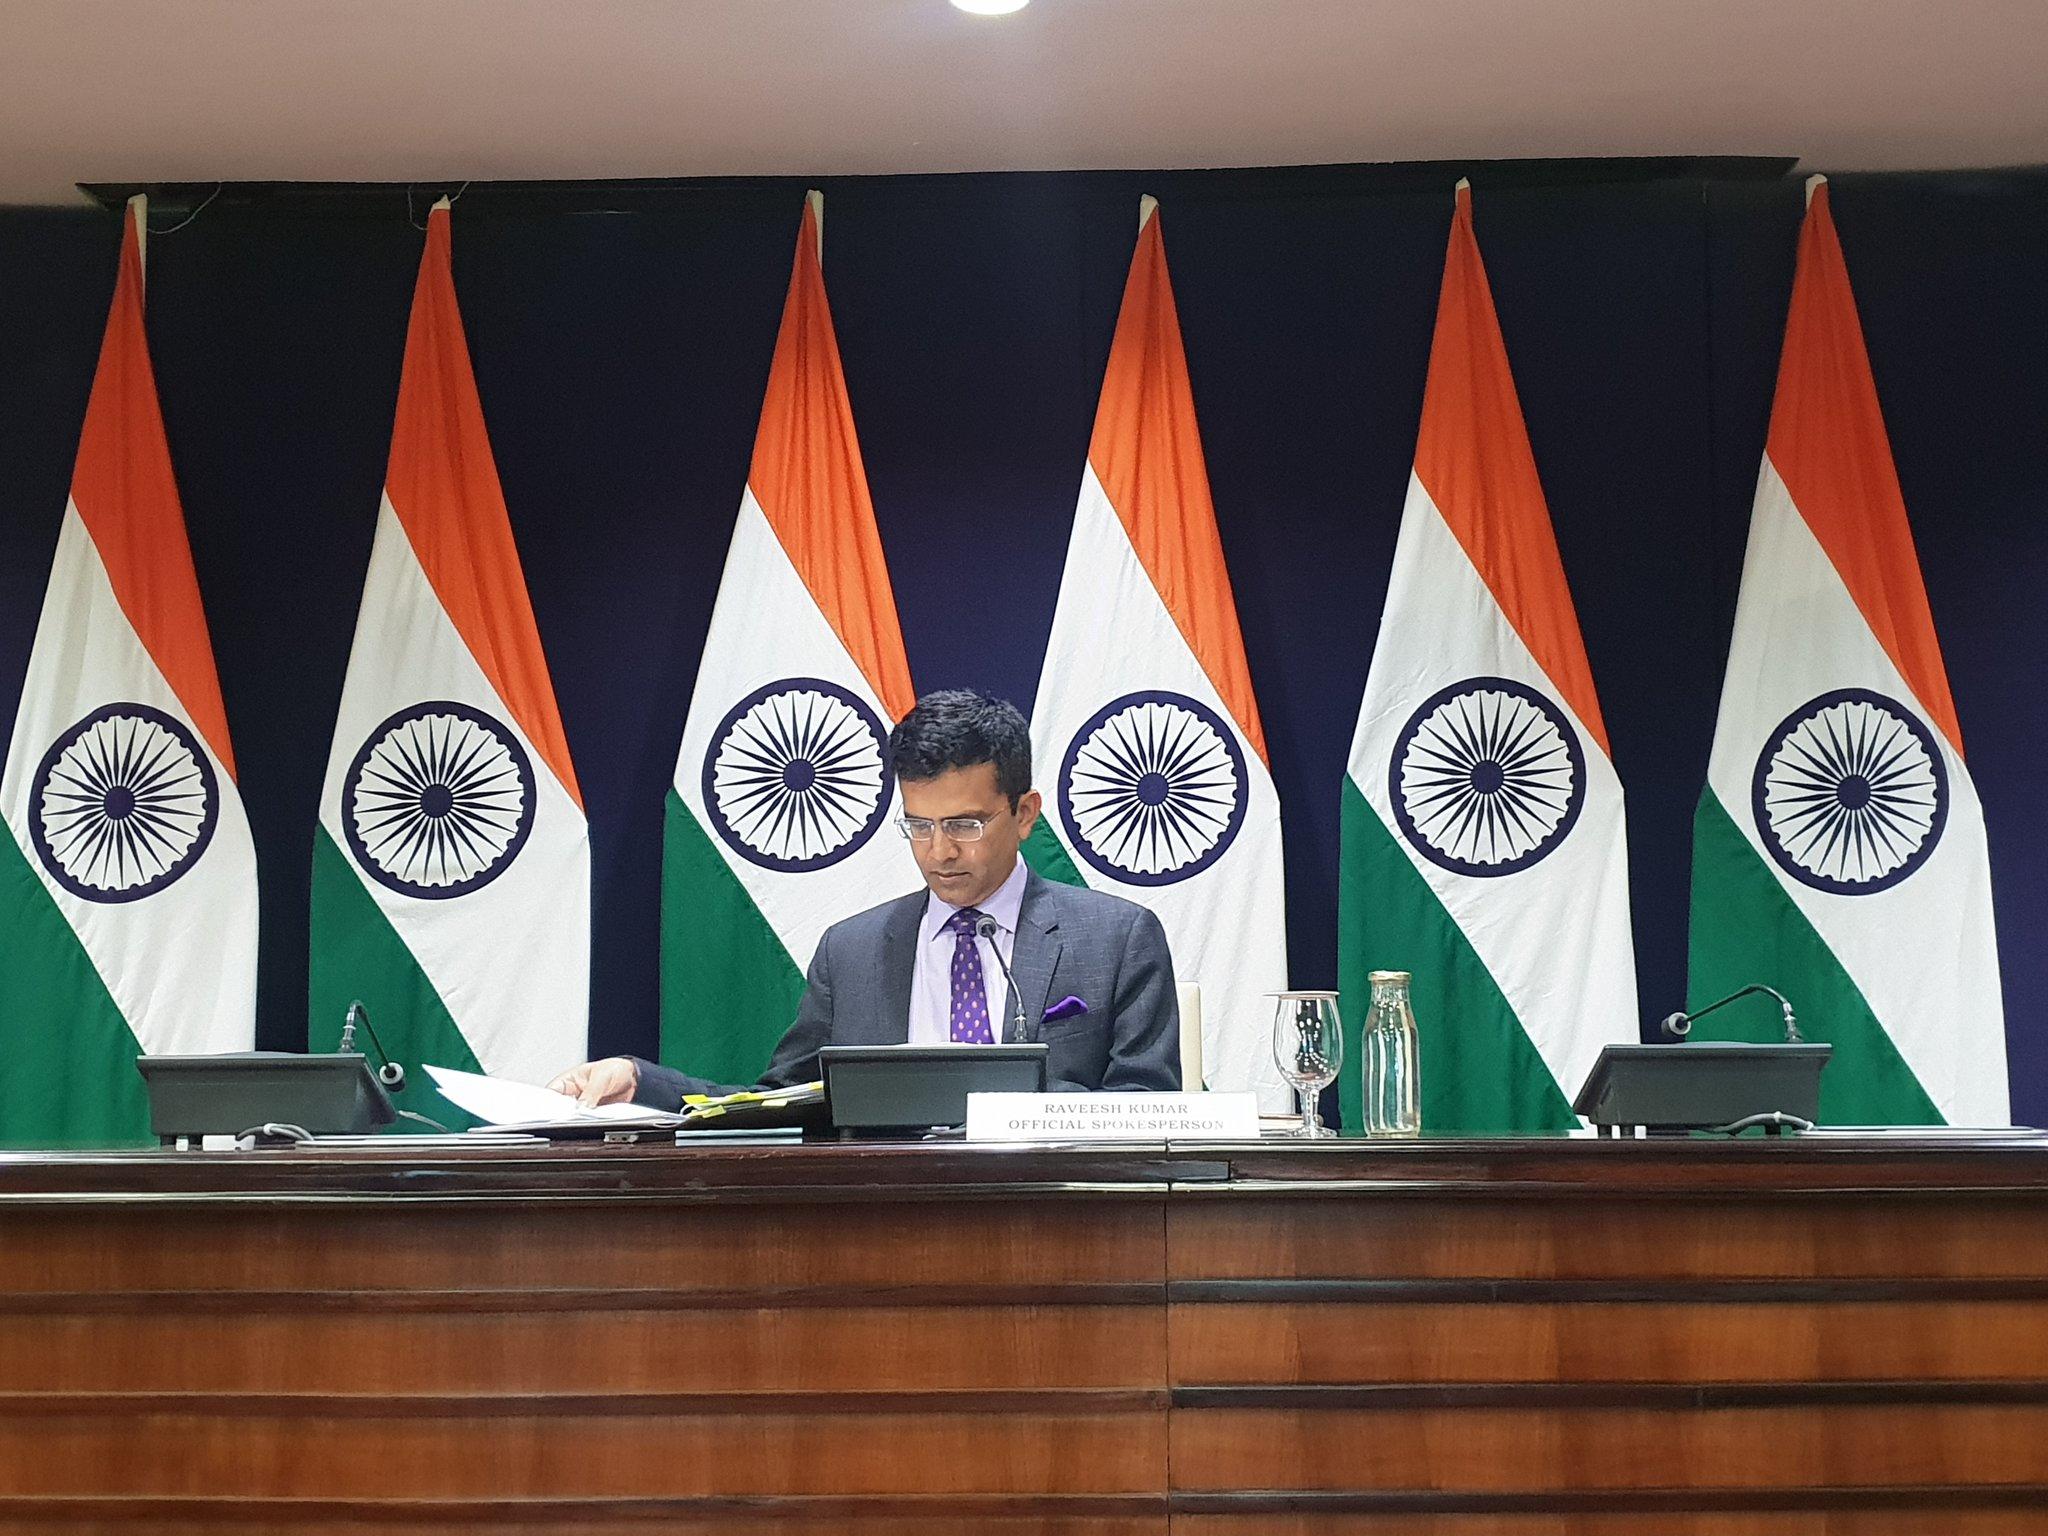 Refrain from making irresponsible comments on Delhi Violence: MEA